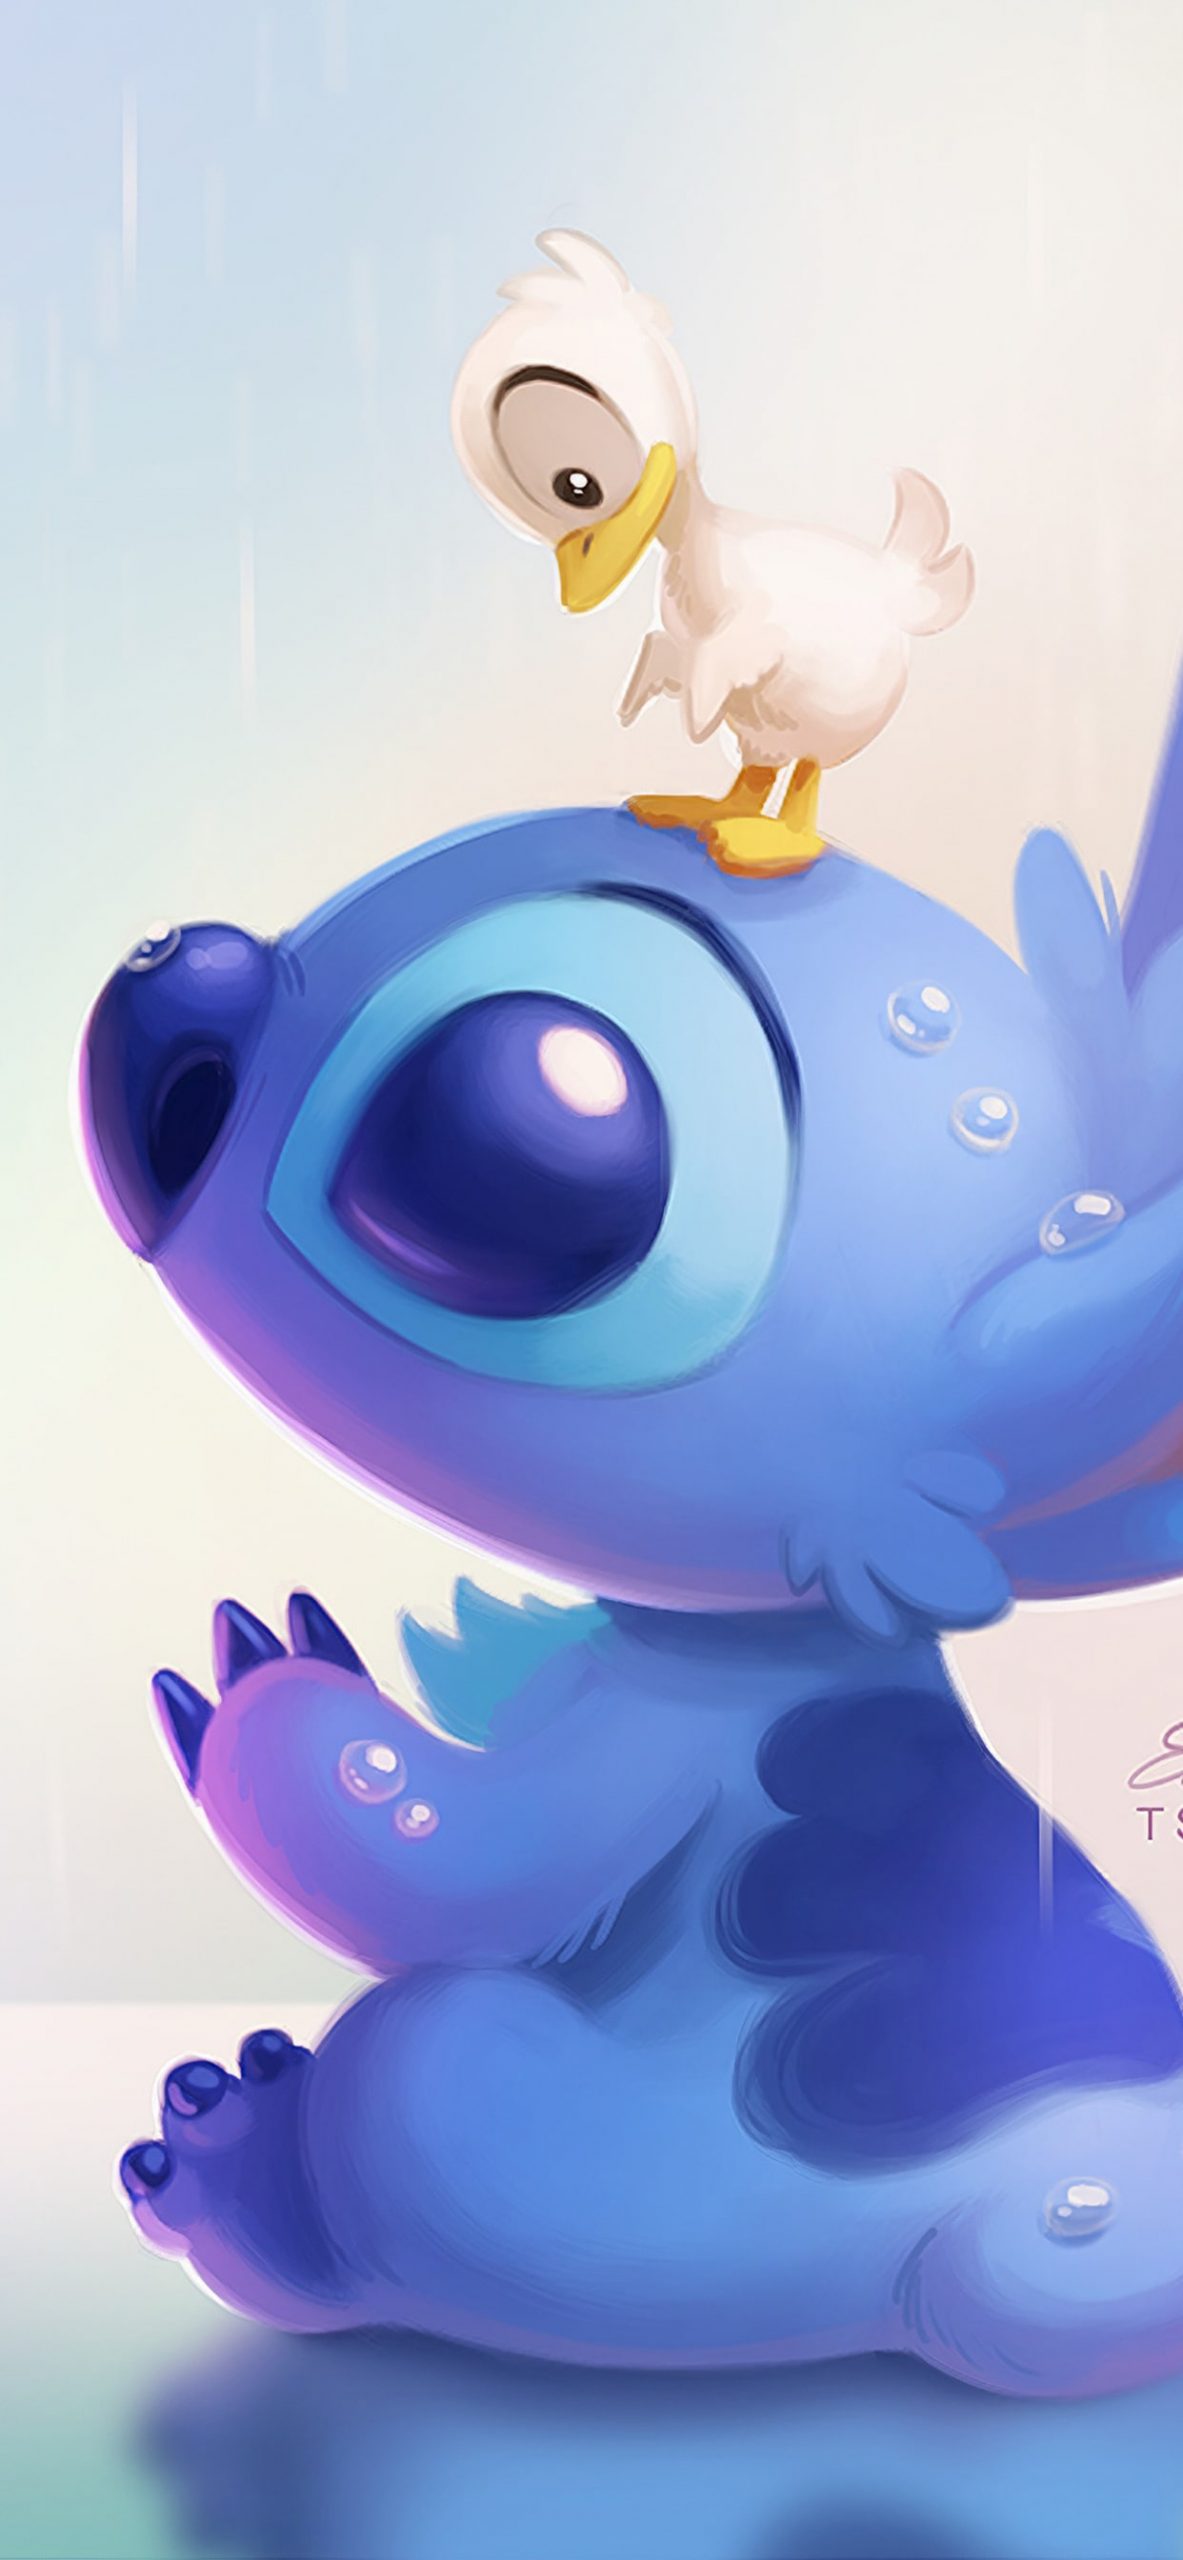 Ohana Wallpaper - Art by Amy 🖤's Ko-fi Shop - Ko-fi ❤️ Where creators get  support from fans through donations, memberships, shop sales and more! The  original 'Buy Me a Coffee' Page.